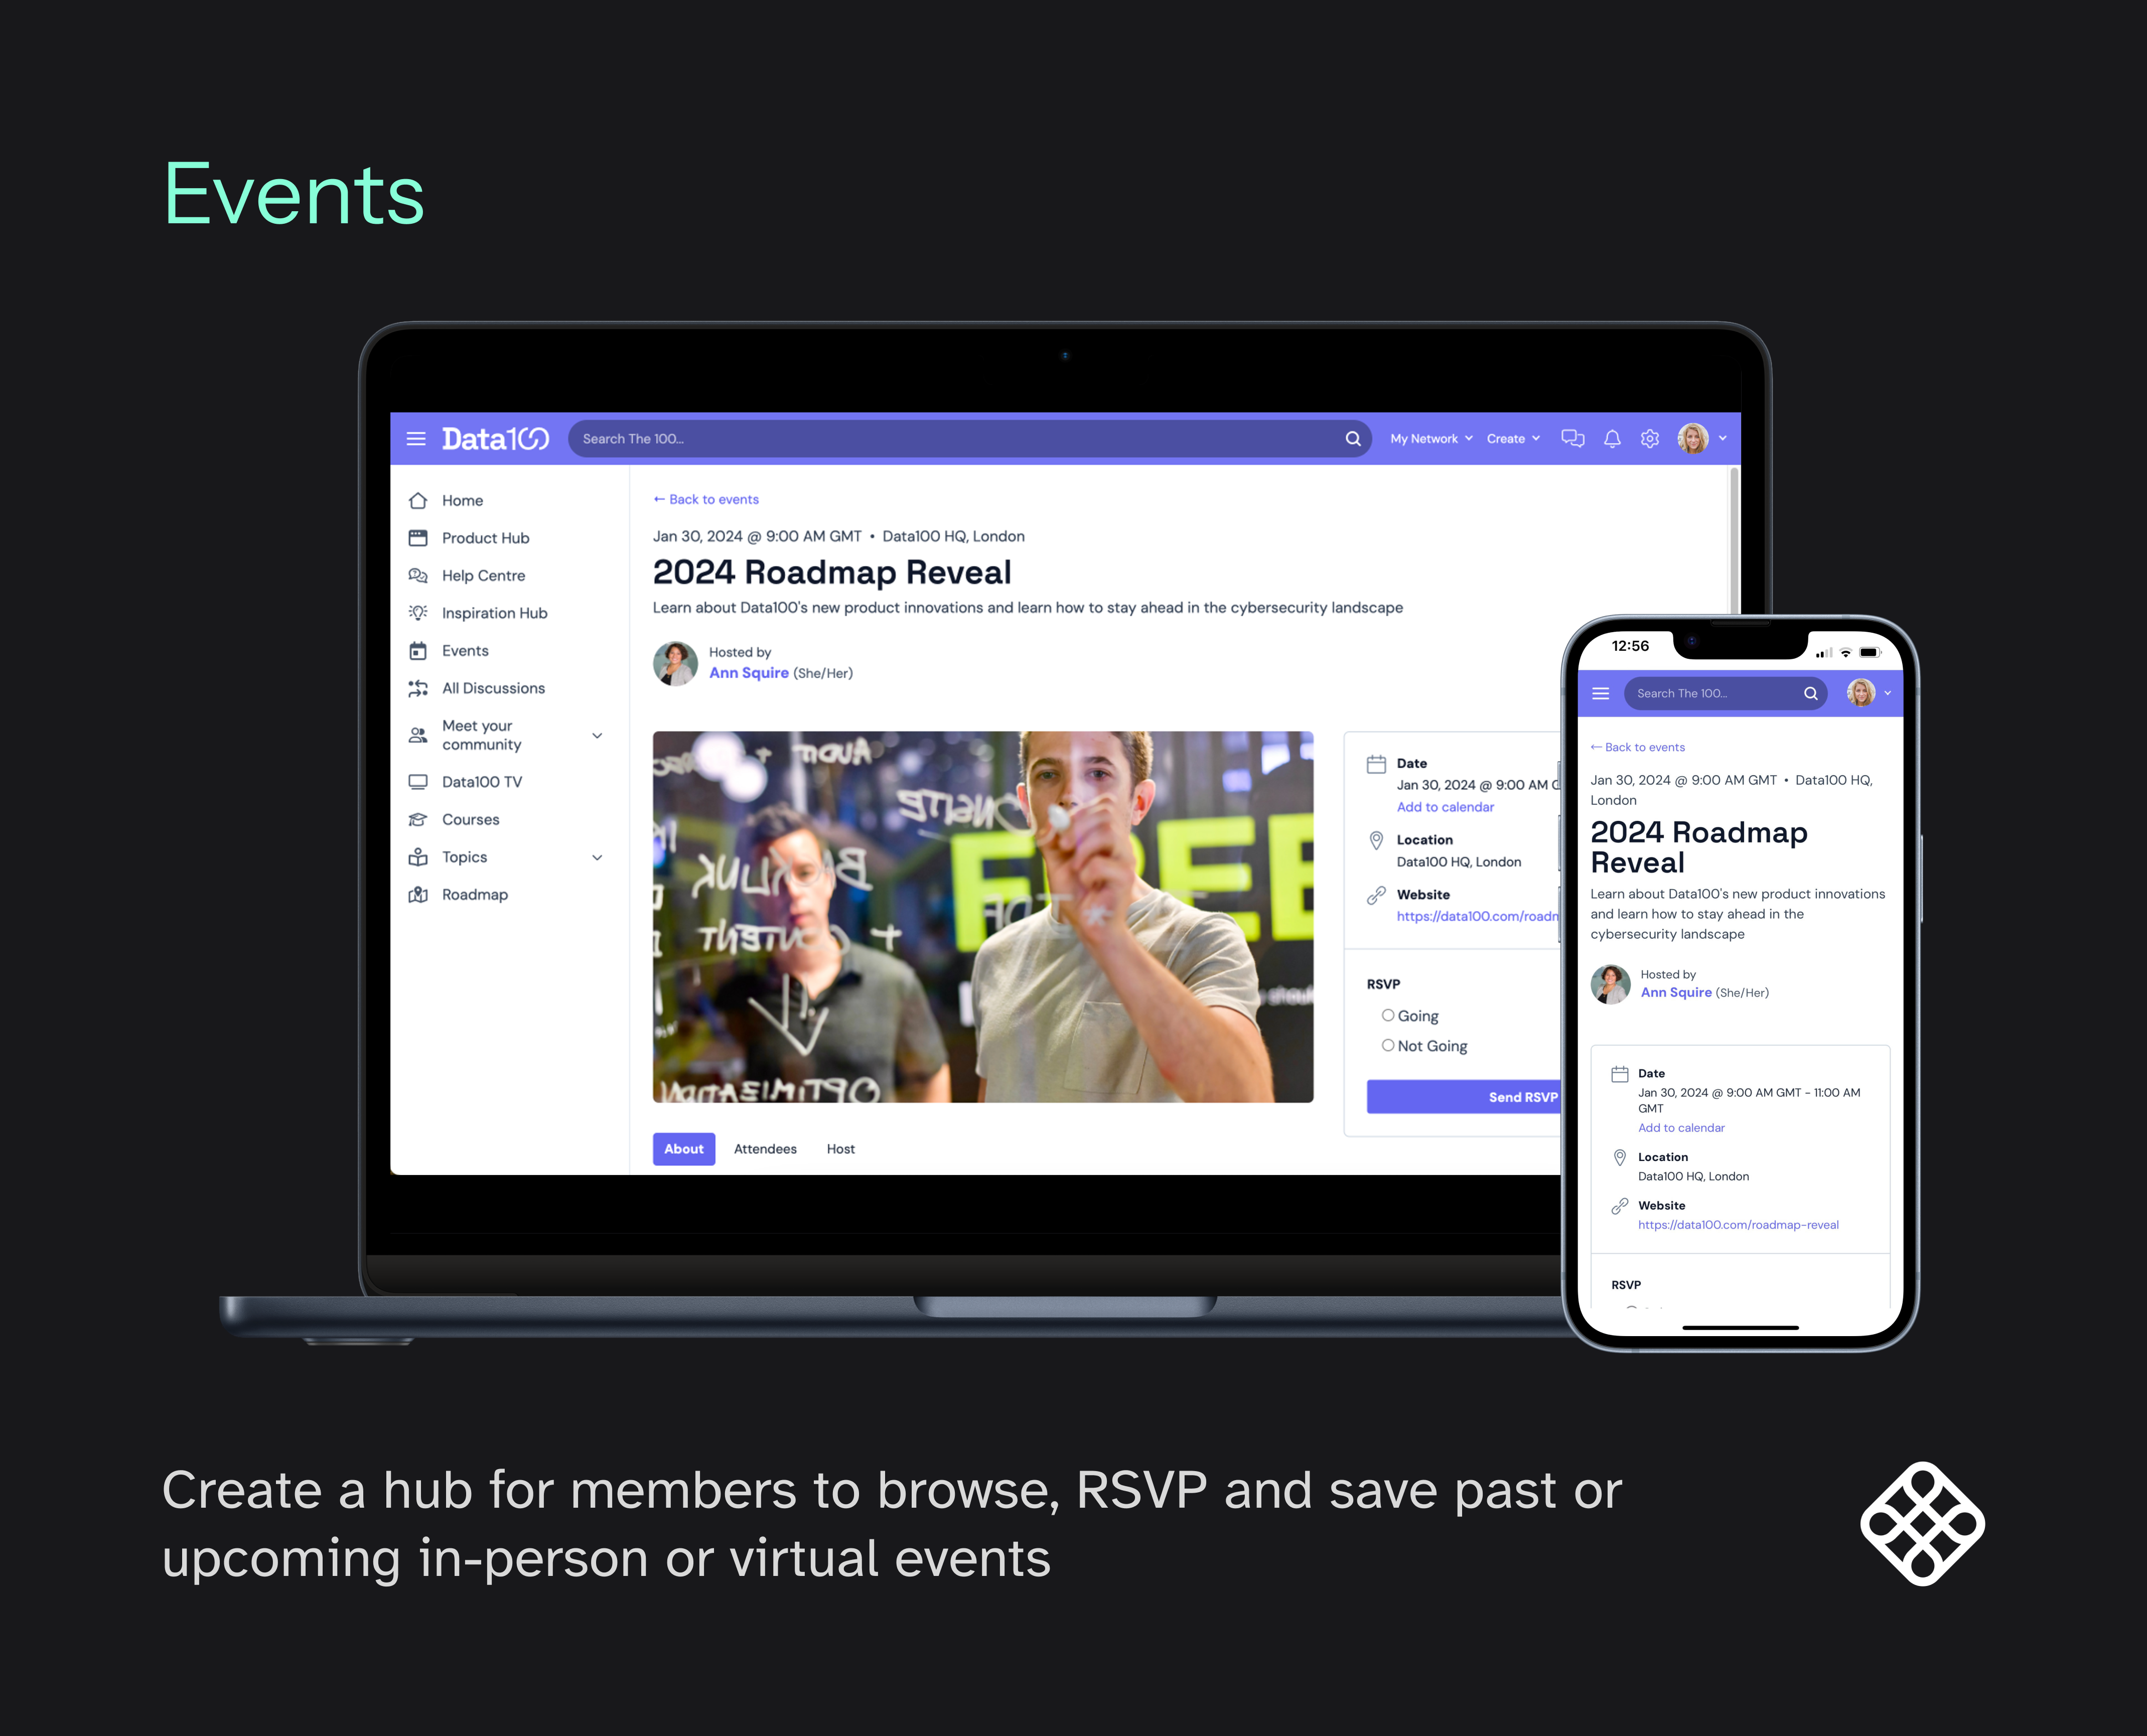 Create a hub for members to browse, RSVP and save past or upcoming in-person or virtual events